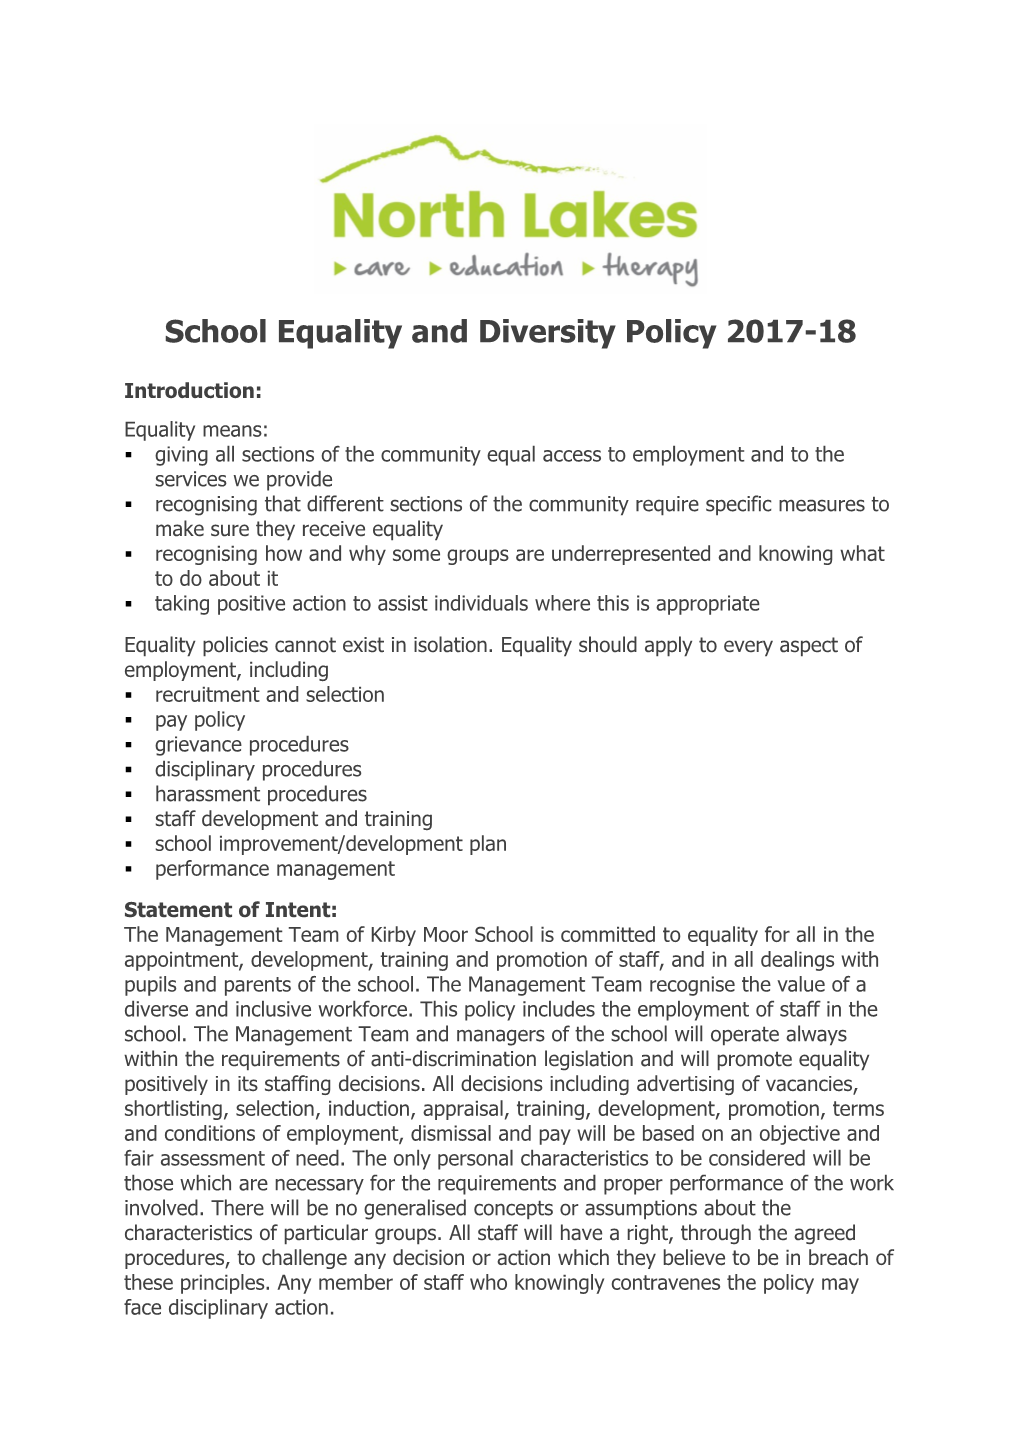 School Equality and Diversity Policy 2017-18